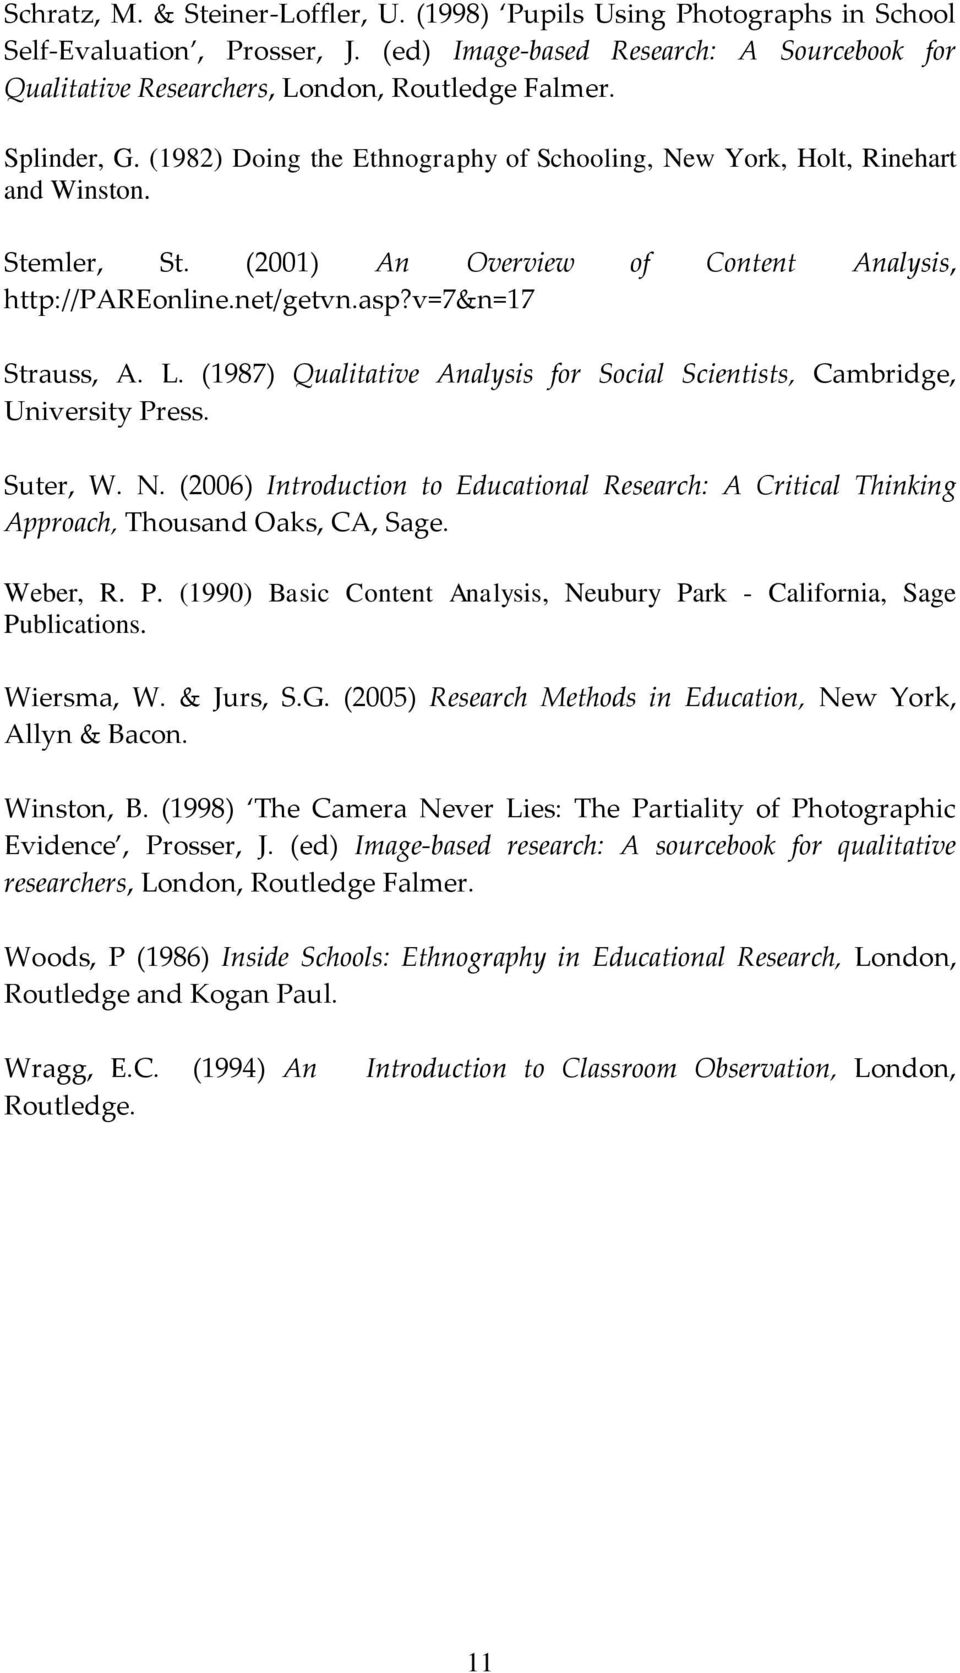 L. (1987) Qualitative Analysis for Social Scientists, Cambridge, University Press. Suter, W. N. (2006) Introduction to Educational Research: A Critical Thinking Approach, Thousand Oaks, CA, Sage.